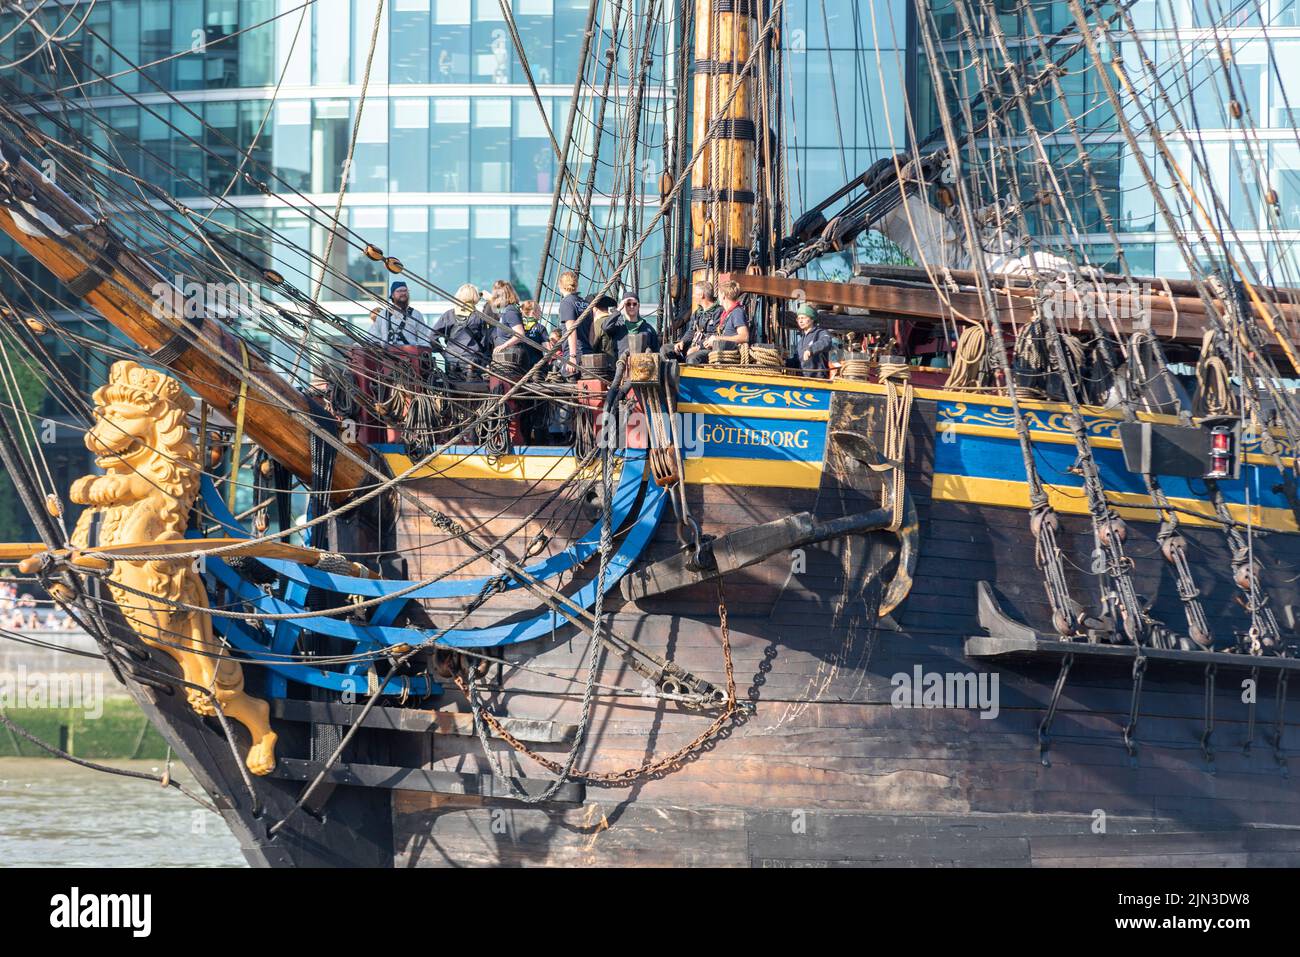 Bow, figurehead and crew of Gotheborg of Sweden, a sailing replica of the Swedish East Indiaman Gotheborg I, visiting London, UK. Prow details Stock Photo